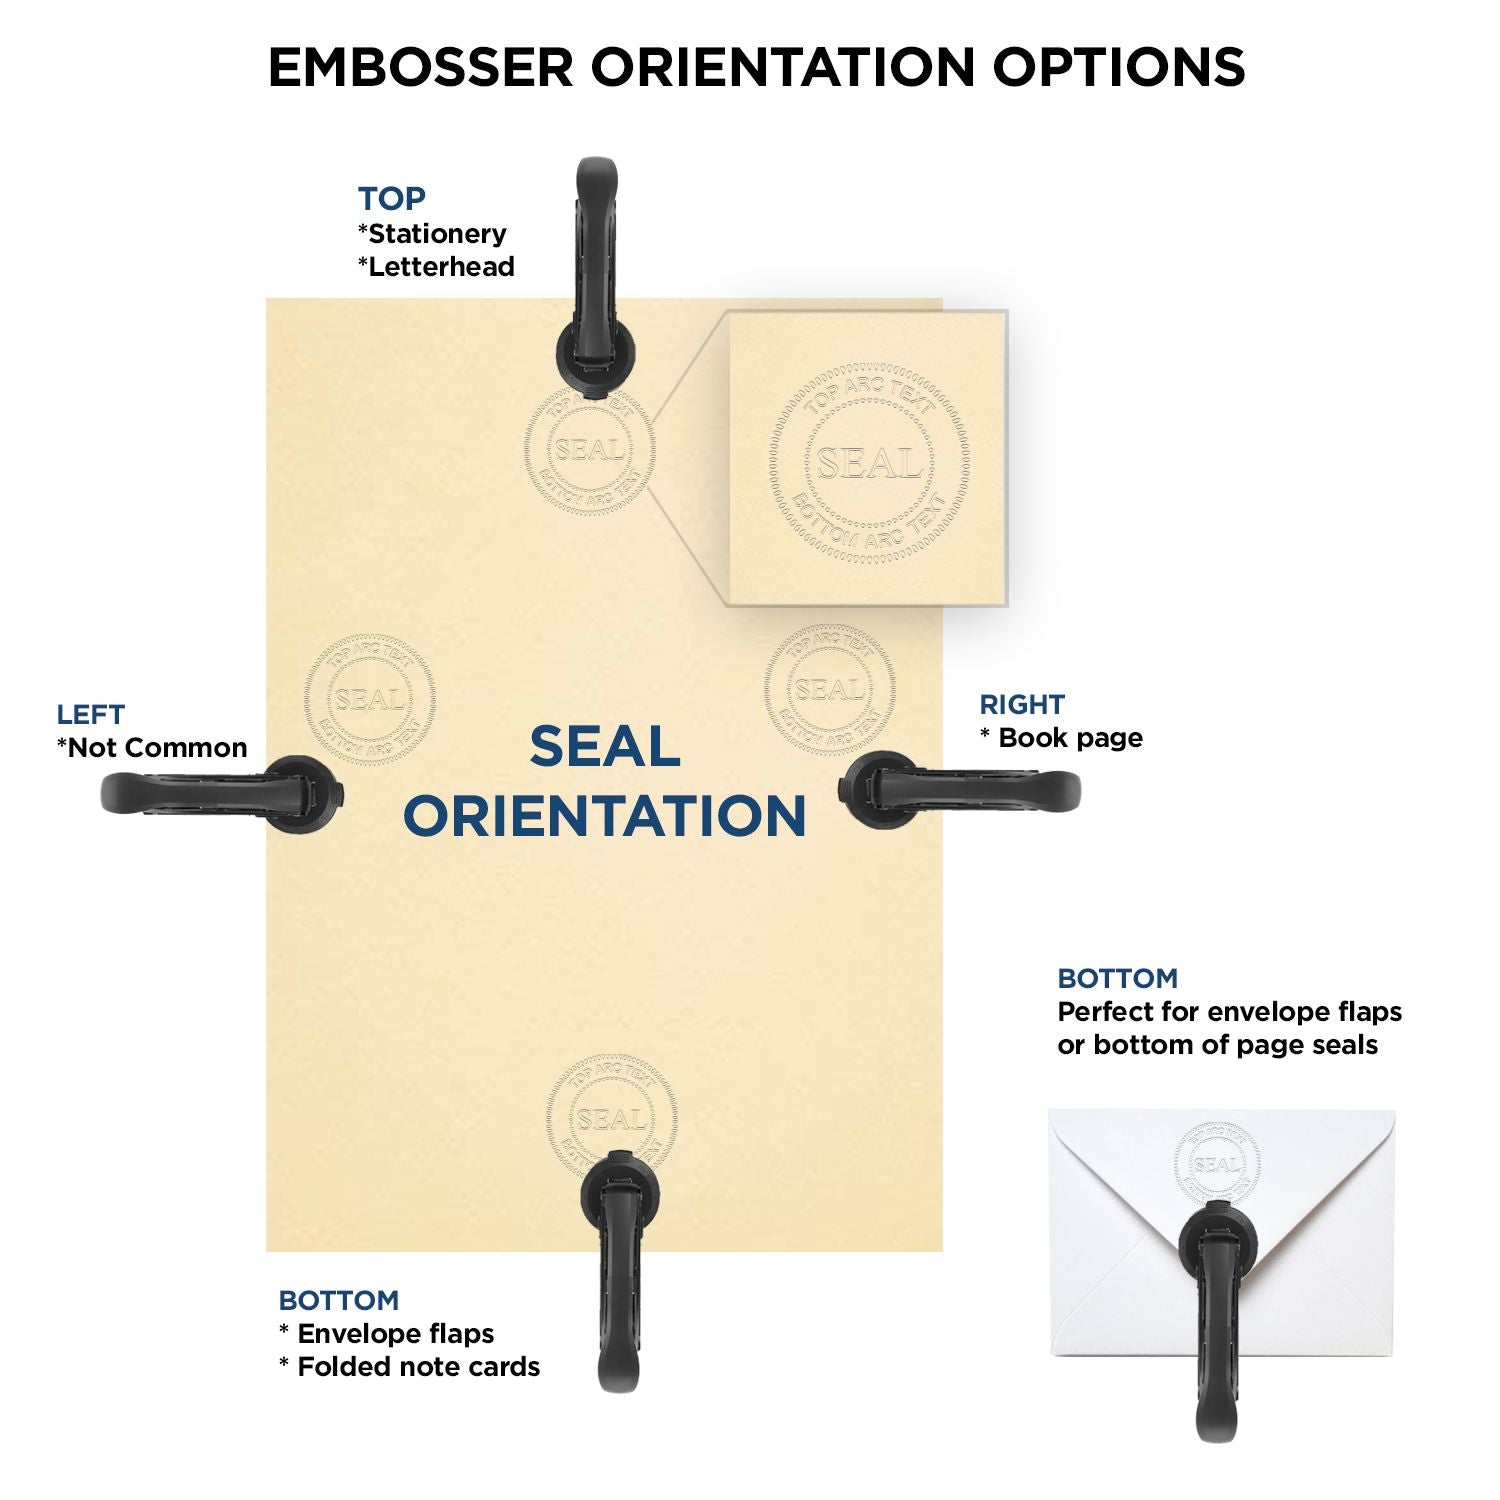 An infographic for the Hybrid Iowa Land Surveyor Seal showing embosser orientation, this is showing examples of a top, bottom, right and left insert.